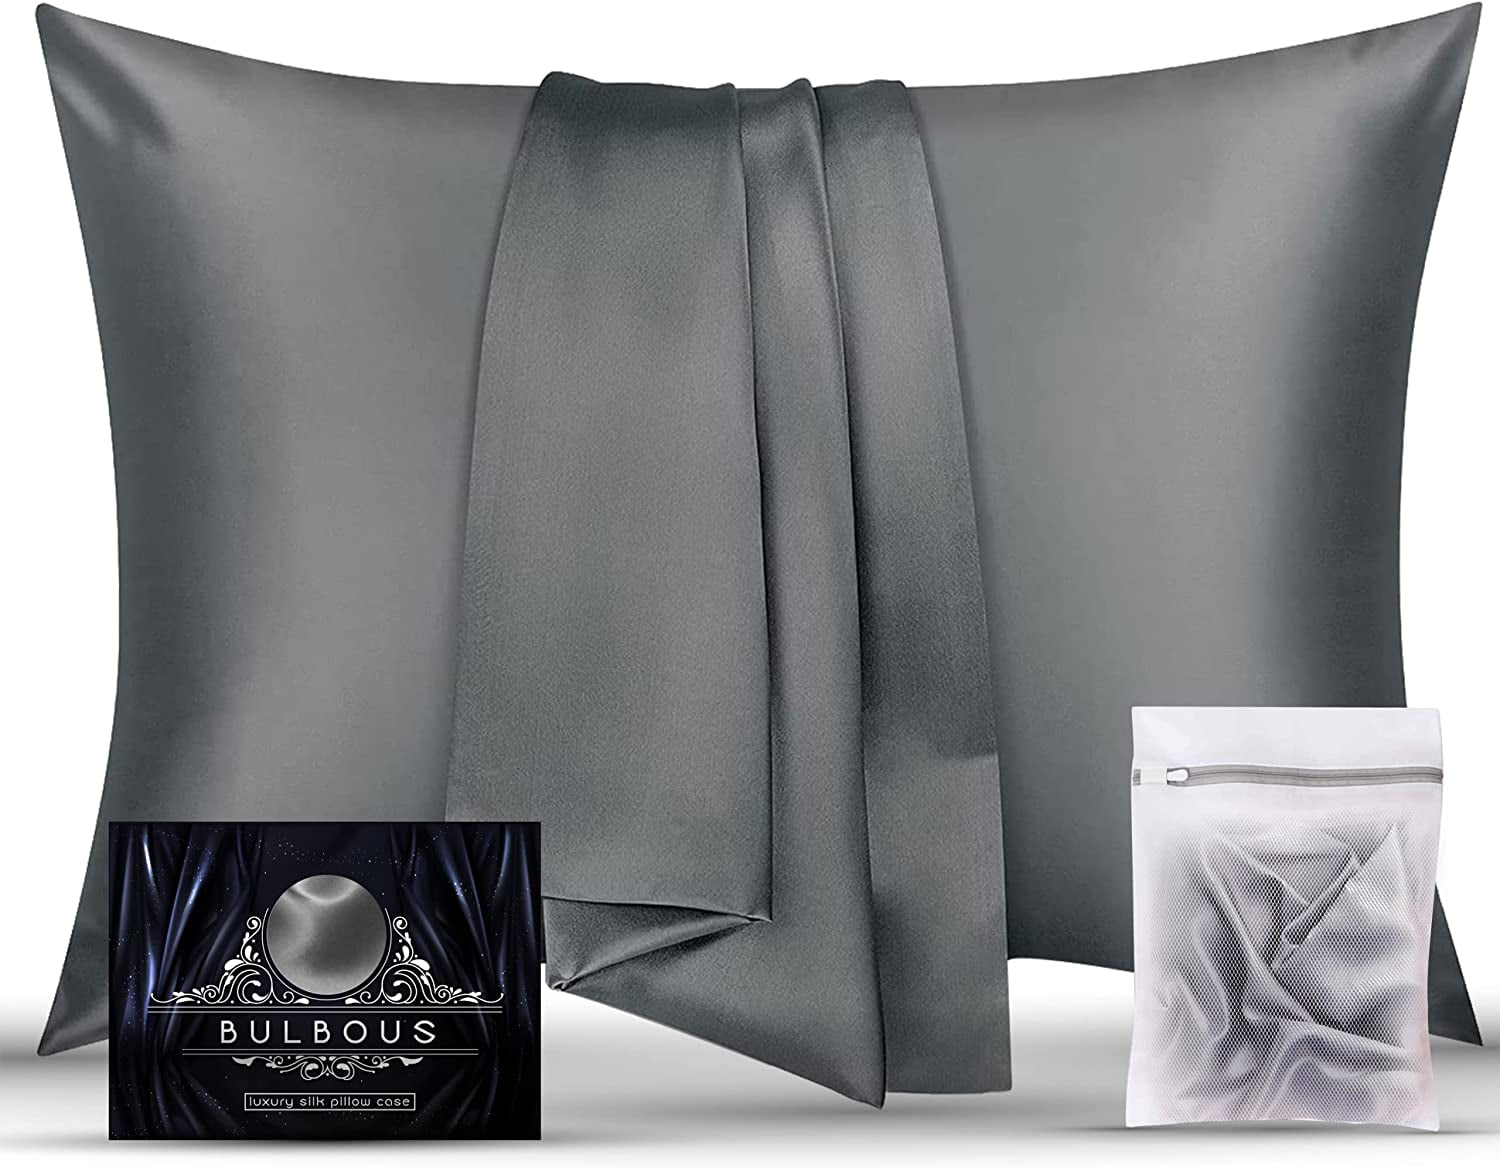 Mulberry Silk Pillowcase for Hair and Skin-22 Momme 100% Silk Pillowcase  and Wash Bag-Ultra Soft and Smooth Premium Grade 6A Silk Pillowcases -1pc  (Standard, Gray) - Walmart.com